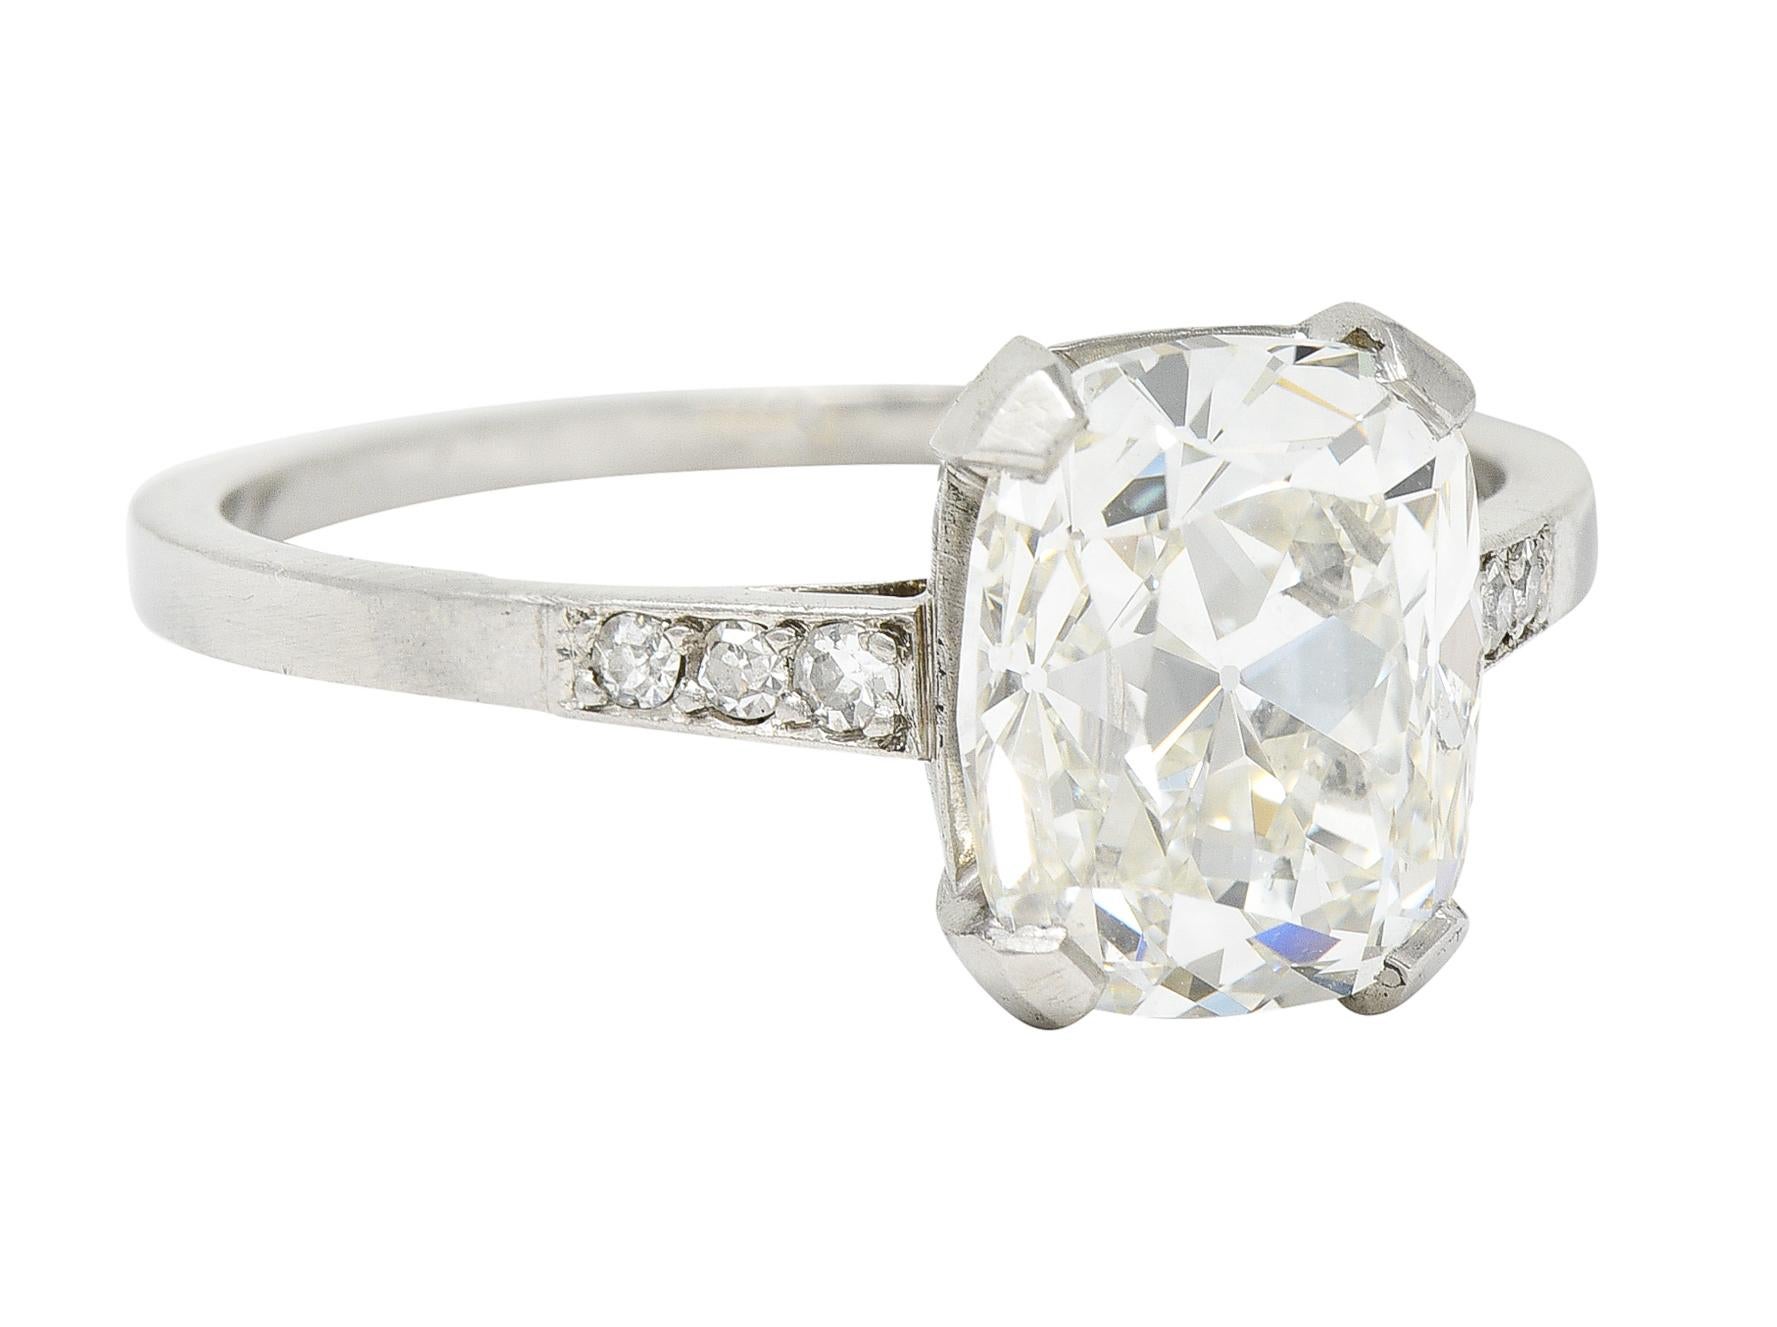 Featuring a radiant cut diamond weighing 2.60 carats - I color with SI2 clarity

Basket set by wide prongs and flanked by subtle cathedral shoulders

Accented by single cut diamonds weighing approximately 0.10 carat - eye clean and white

Tested as